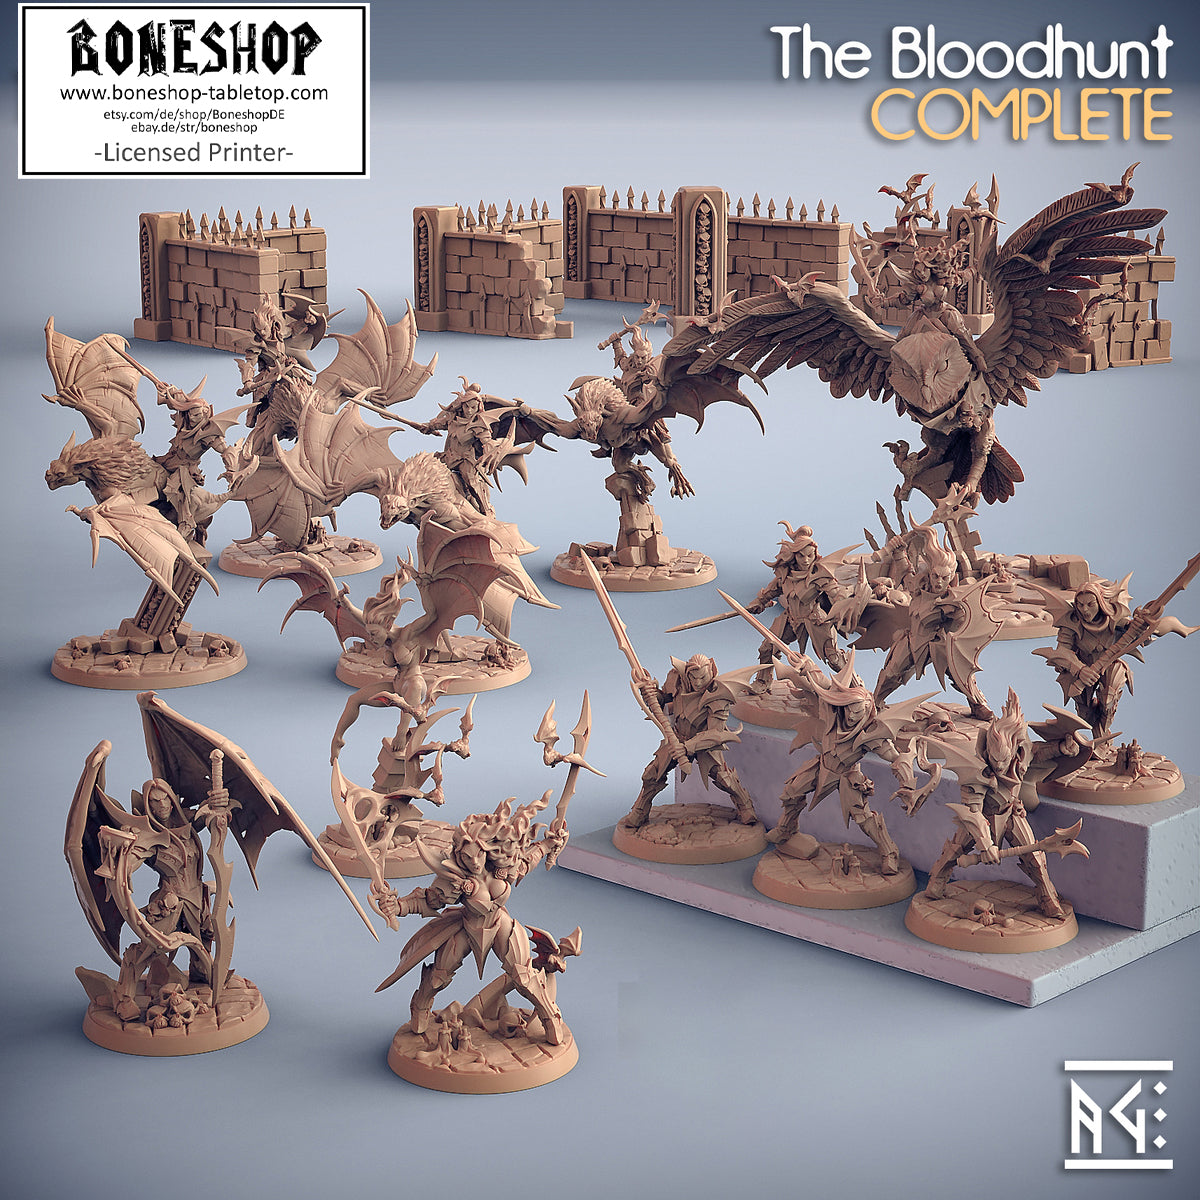 The Bloodhunt - Artisan Guild